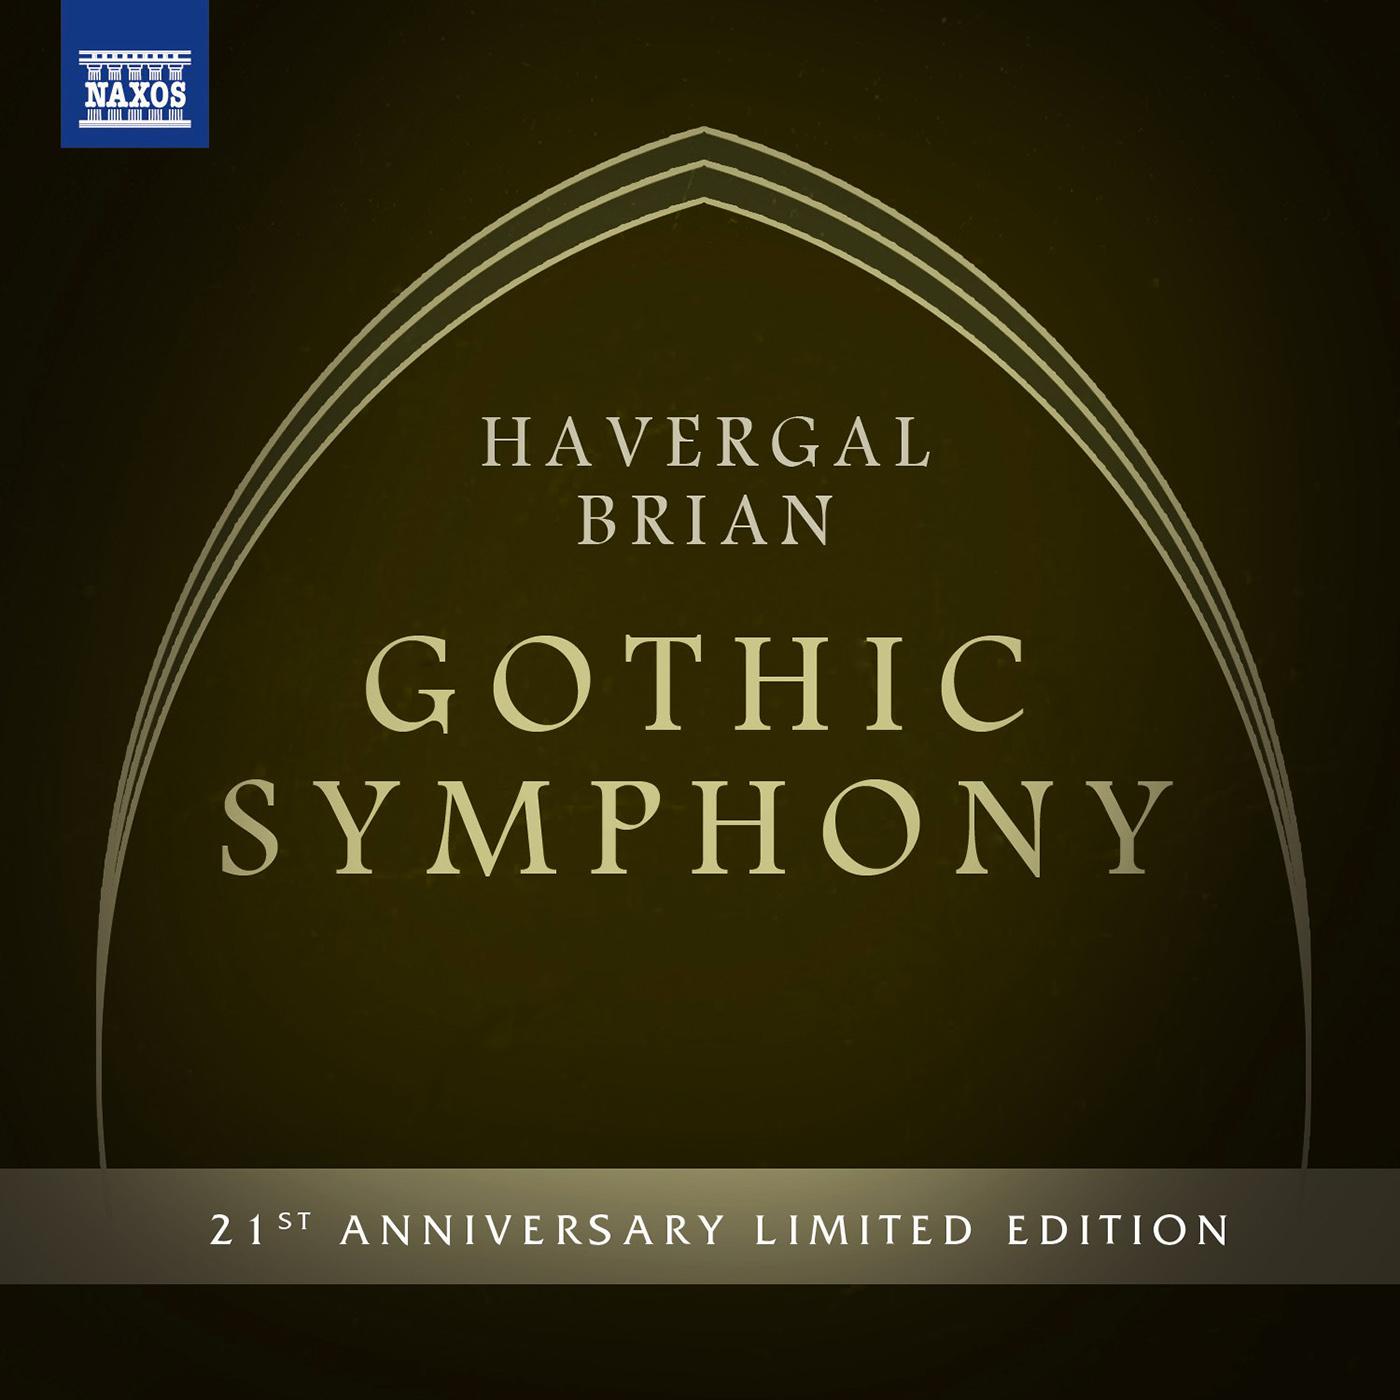 Symphony No. 1 in D Minor, "The Gothic":Part 1: I. Allegro assai: section 3